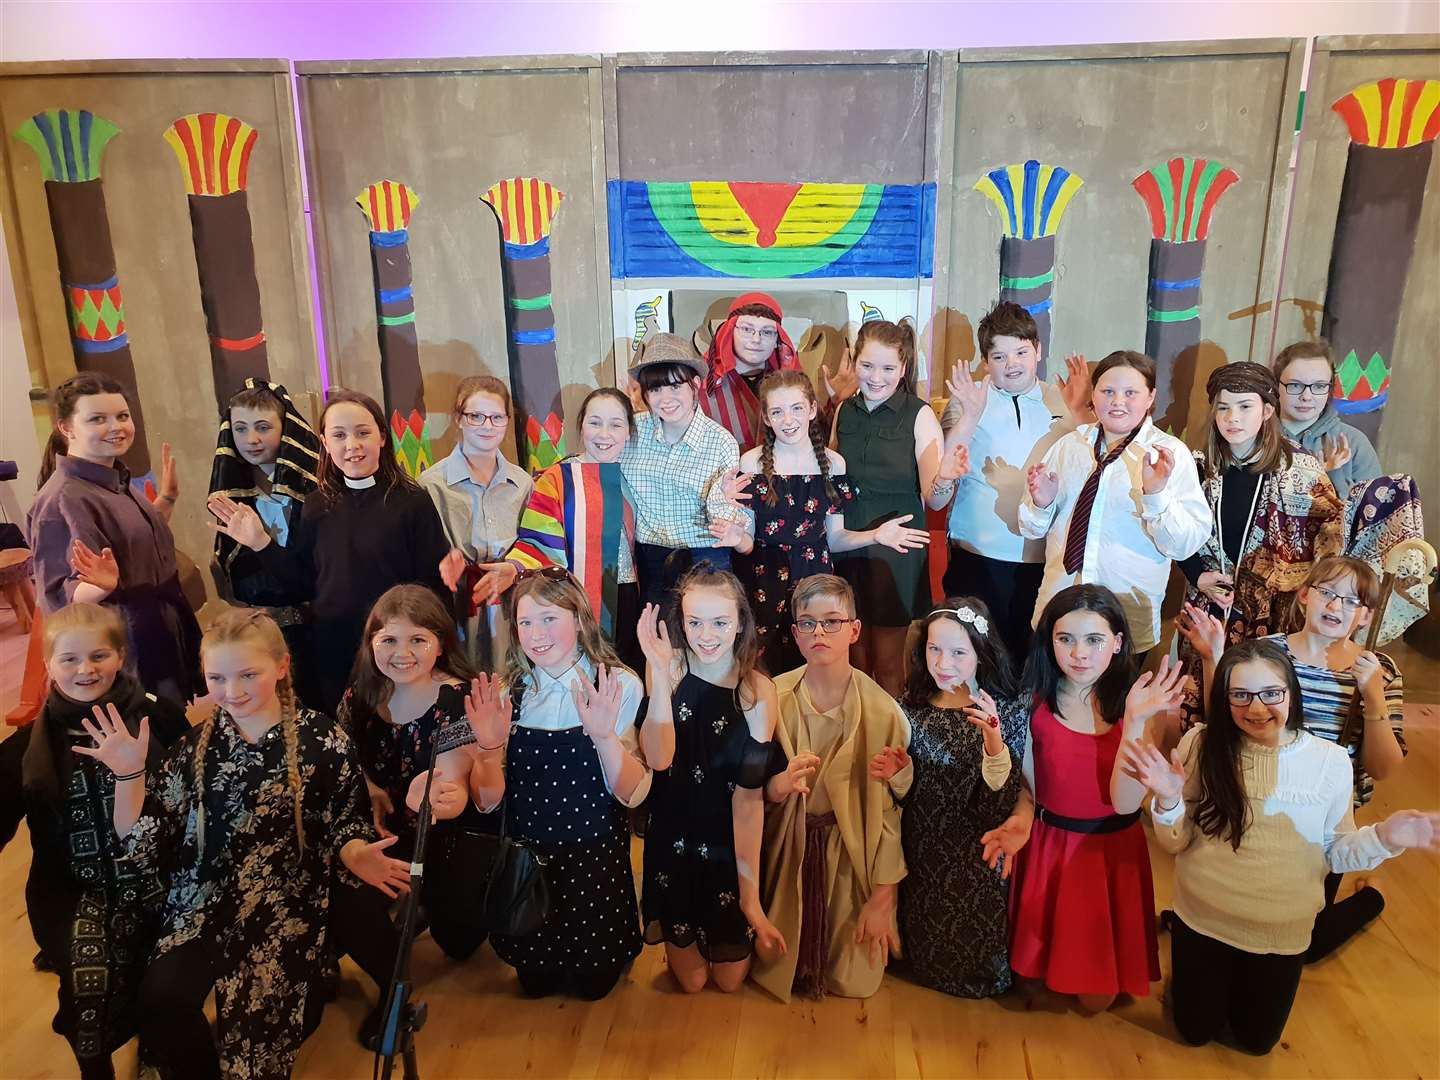 Members of the Dornoch Cathedral Youth Theatre on Saturday.